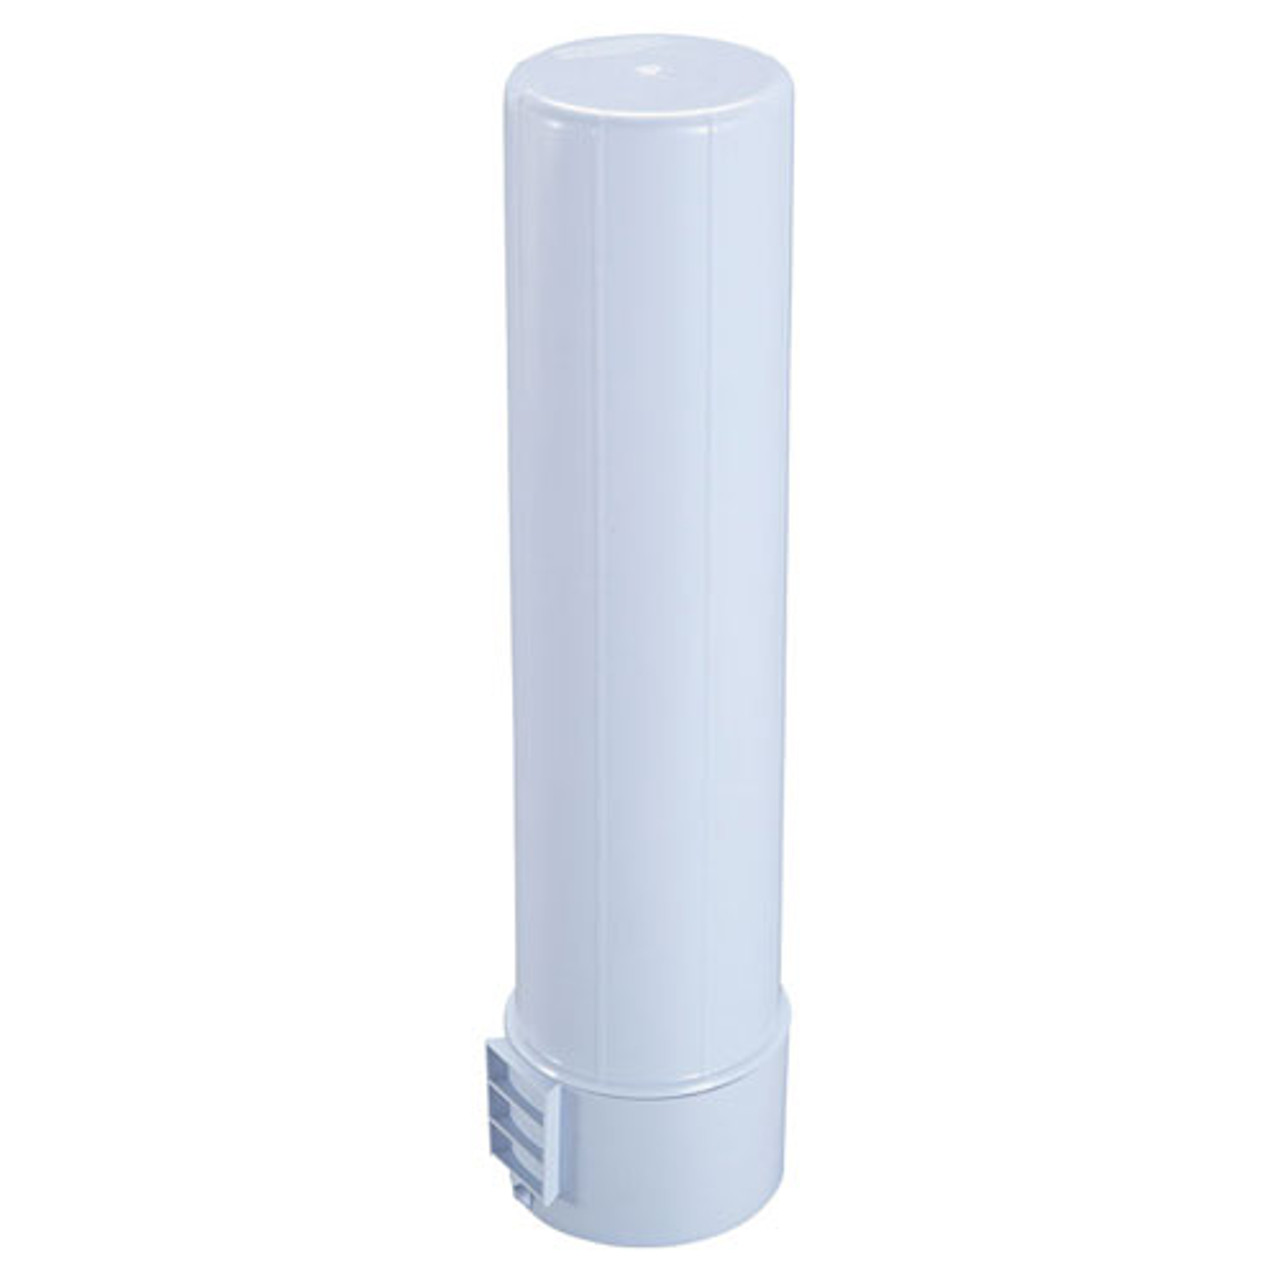 https://cdn11.bigcommerce.com/s-11cqjpjngs/images/stencil/1280x1280/products/63707/79173/rubbermaid-7-oz-cup-dispenser-for-water-cooler-43__91319.1649111517.jpg?c=1